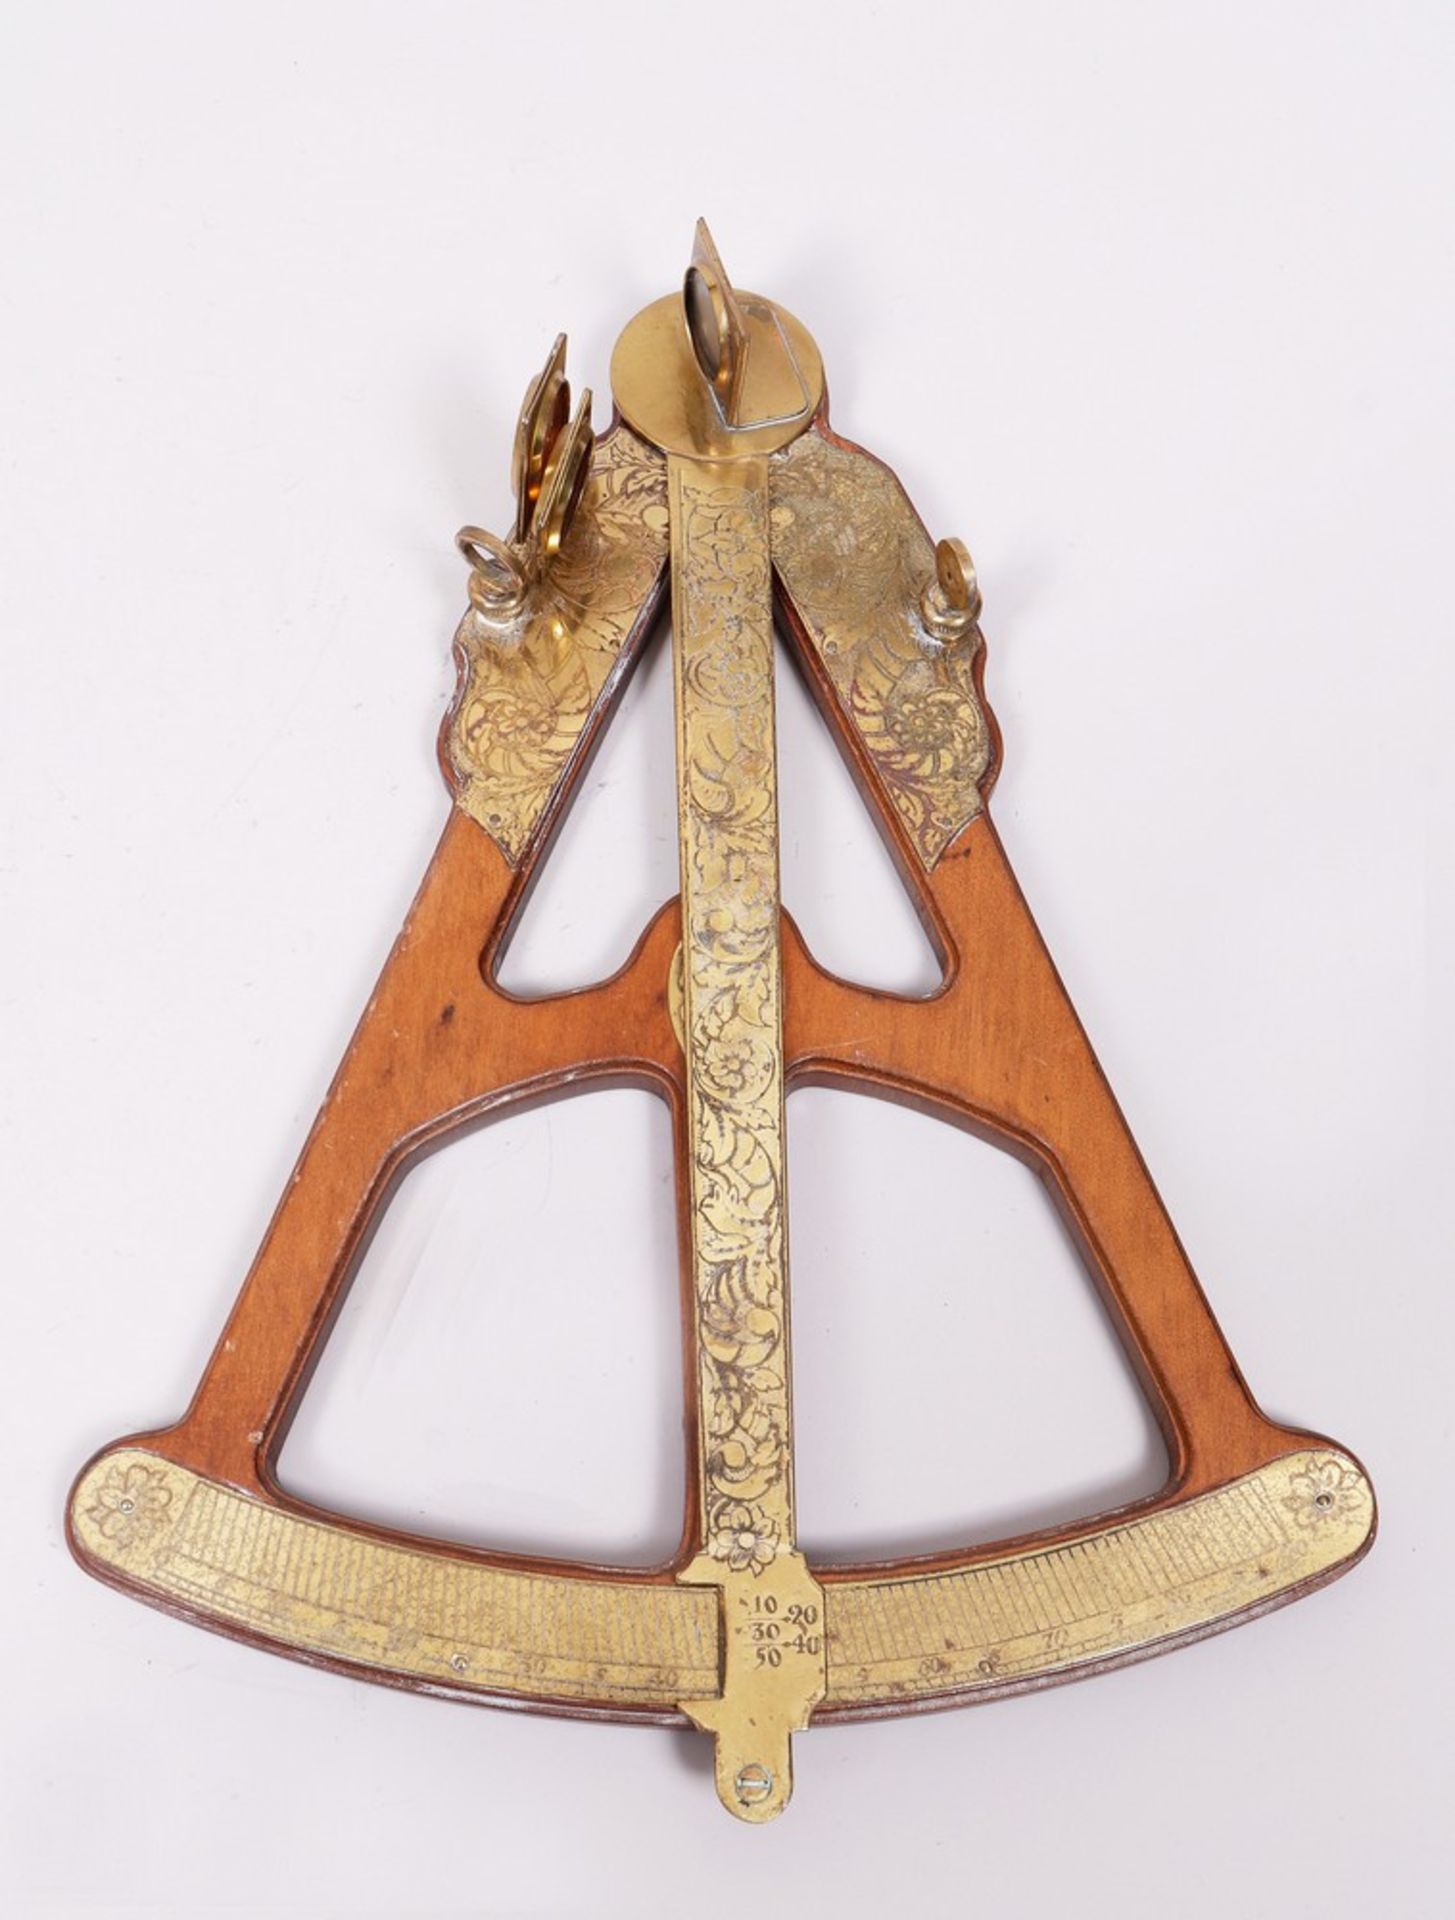 Octant in transport box, replica of an original from the Baroque period - Image 4 of 5